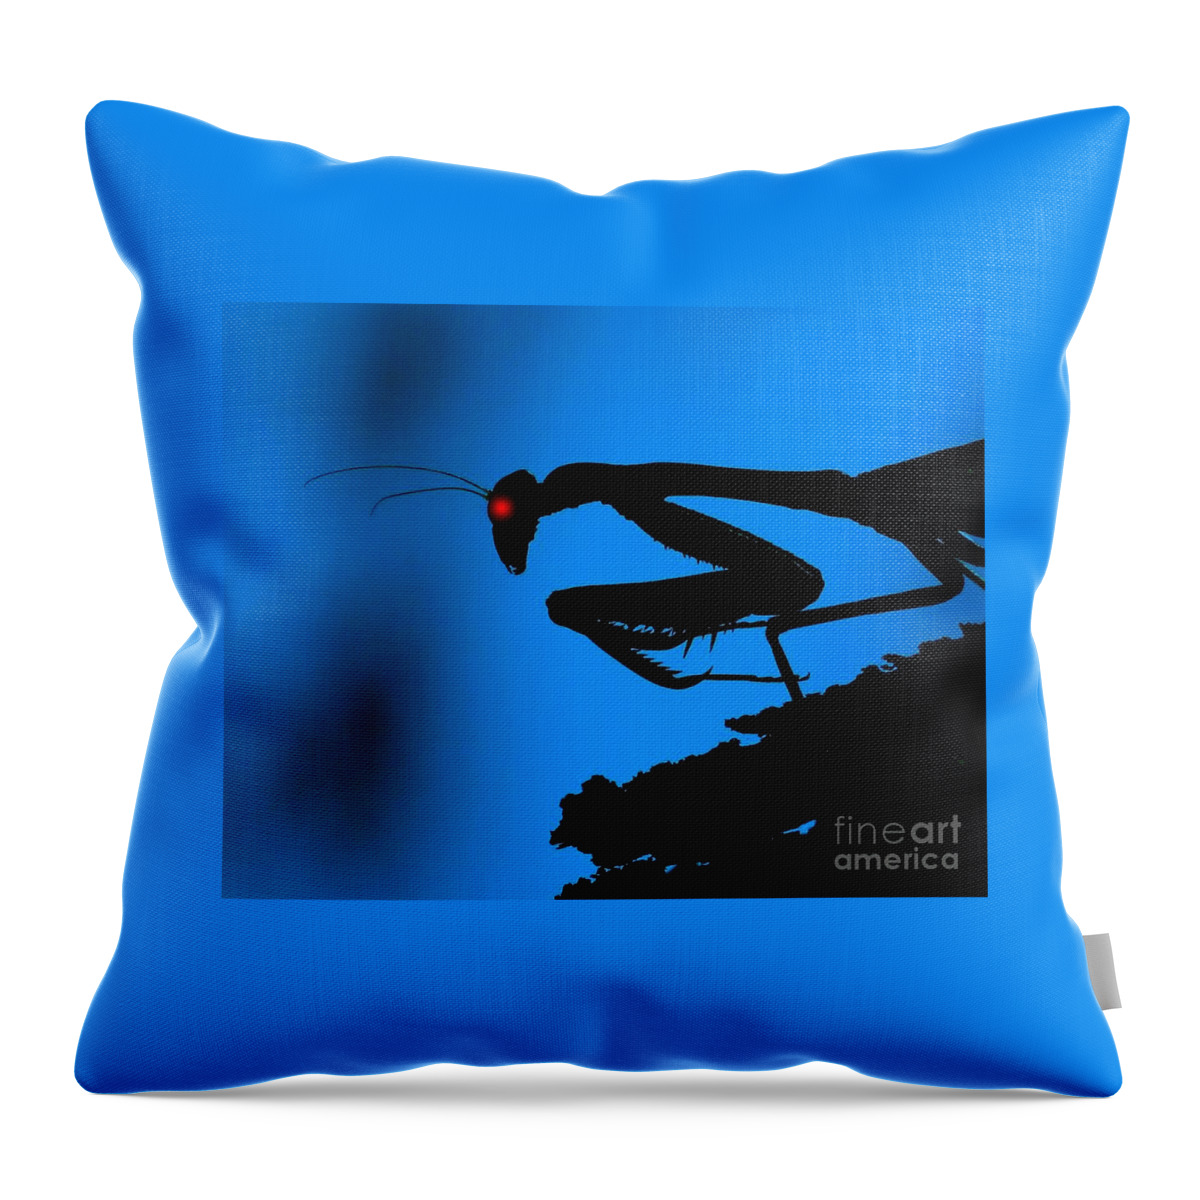 Discomforting Throw Pillow featuring the photograph Preying On Dreams by Patrick Witz